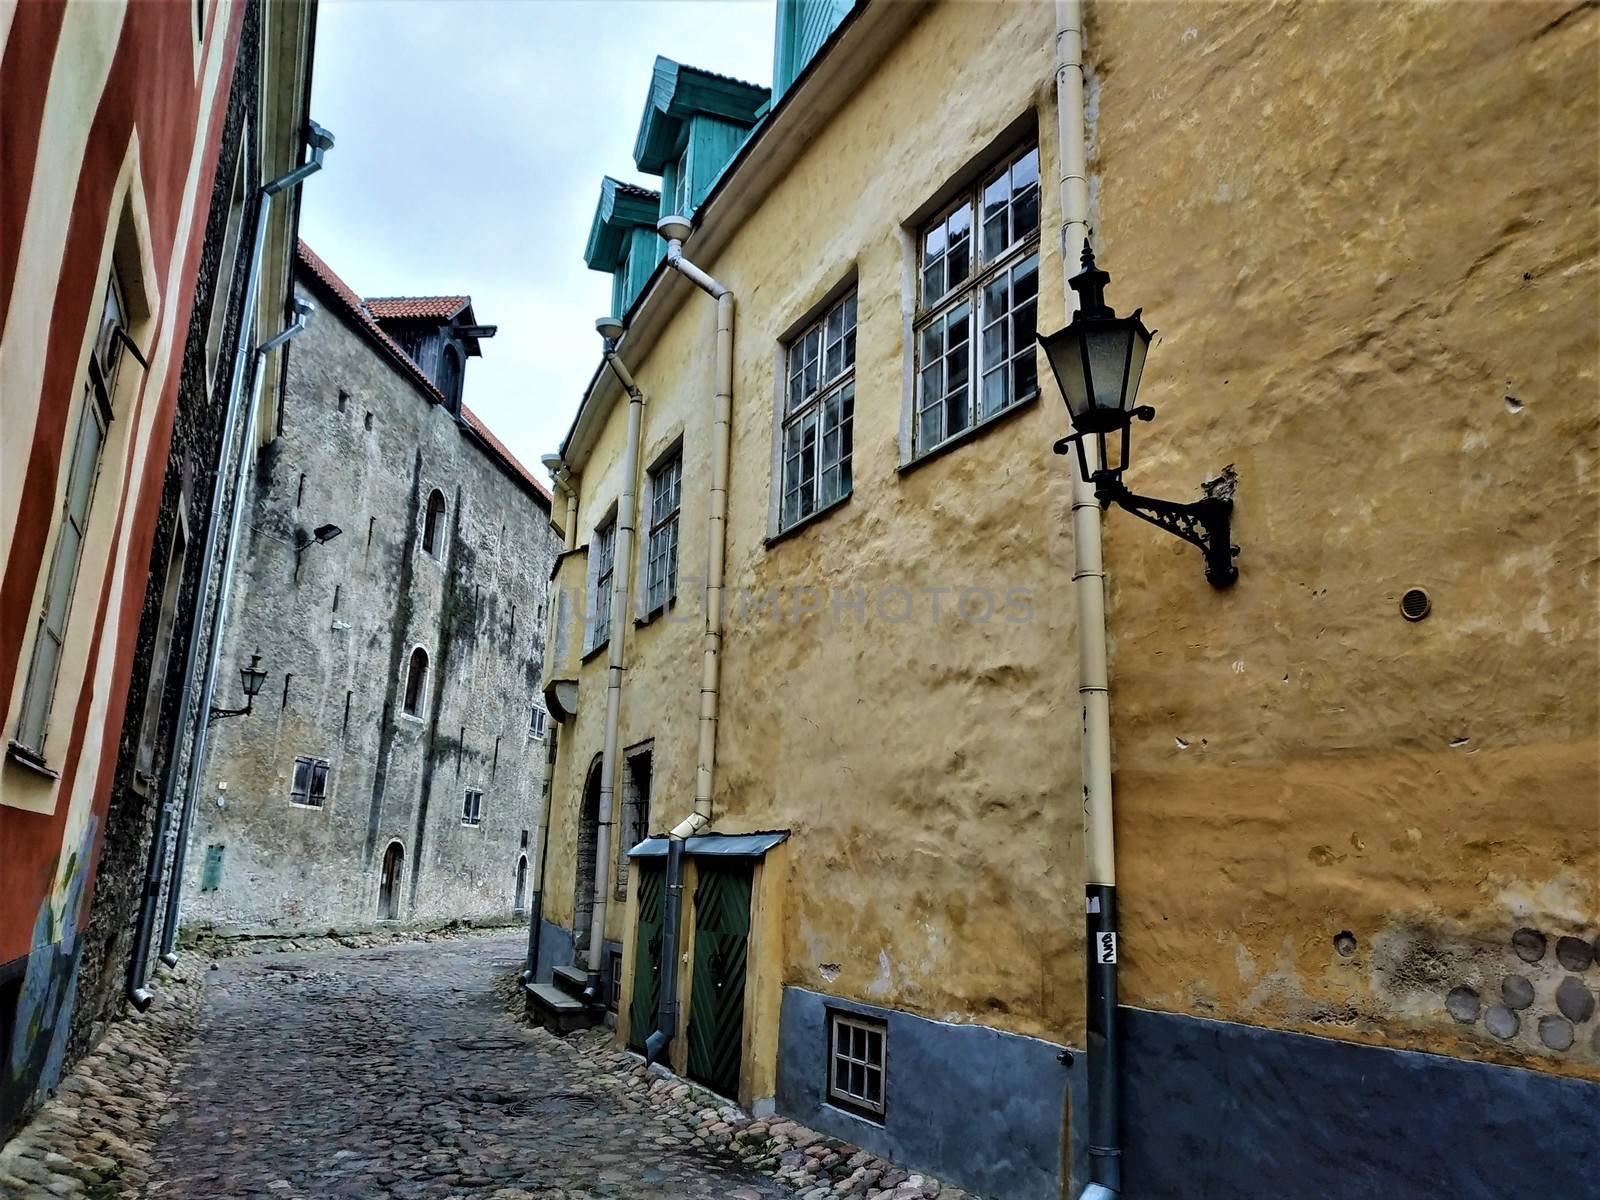 Beautiful old cobblestone street with colorful houses in Tallinn by pisces2386